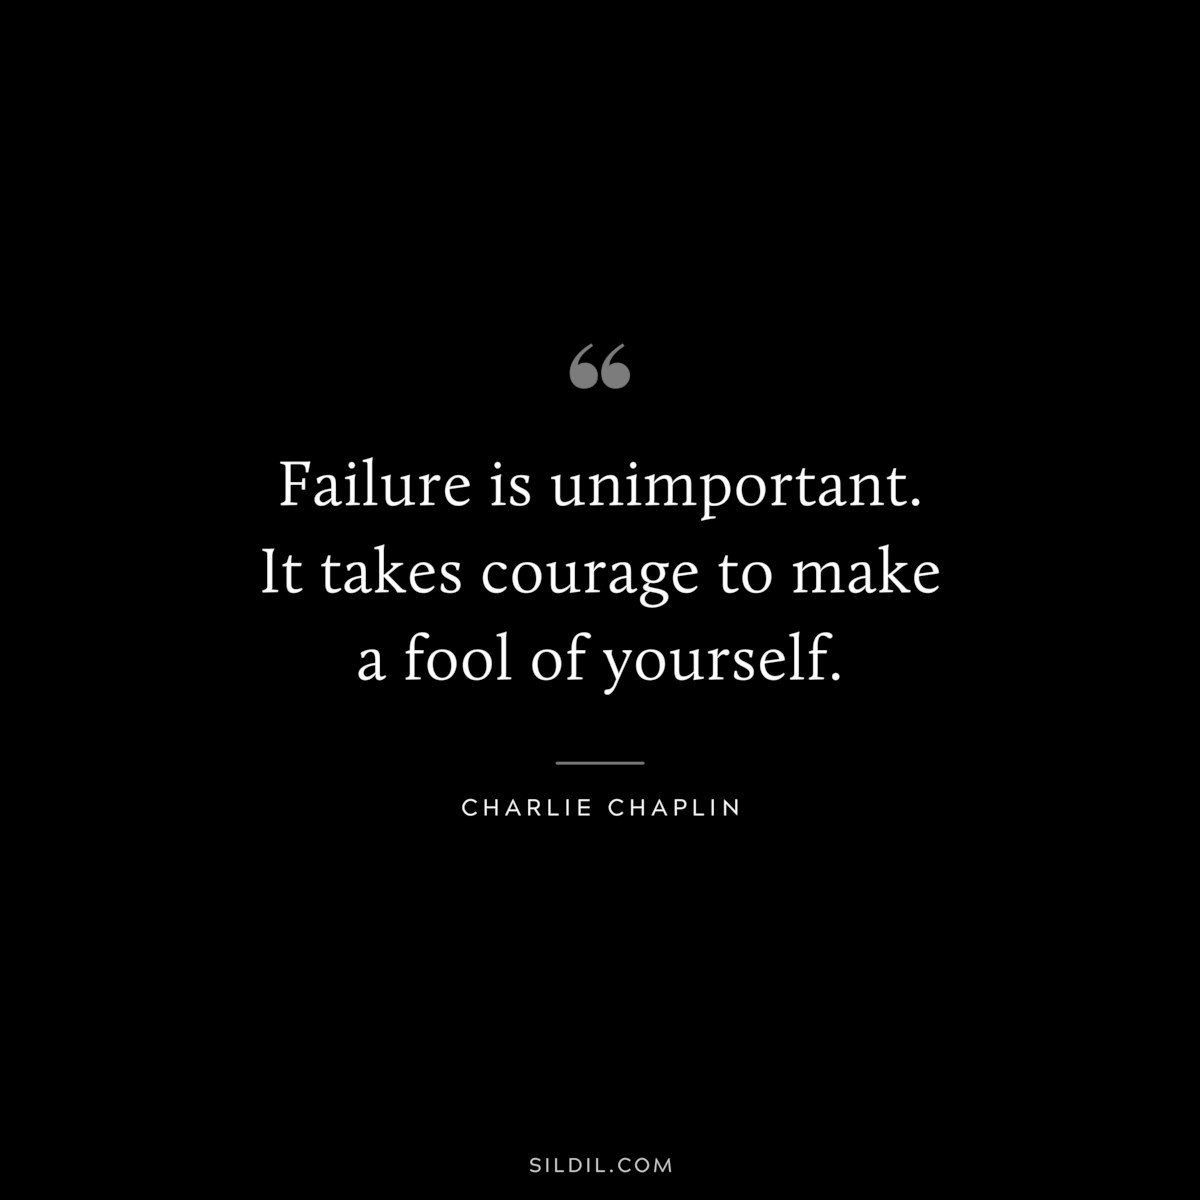 Failure is unimportant. It takes courage to make a fool of yourself. ― Charlie Chaplin